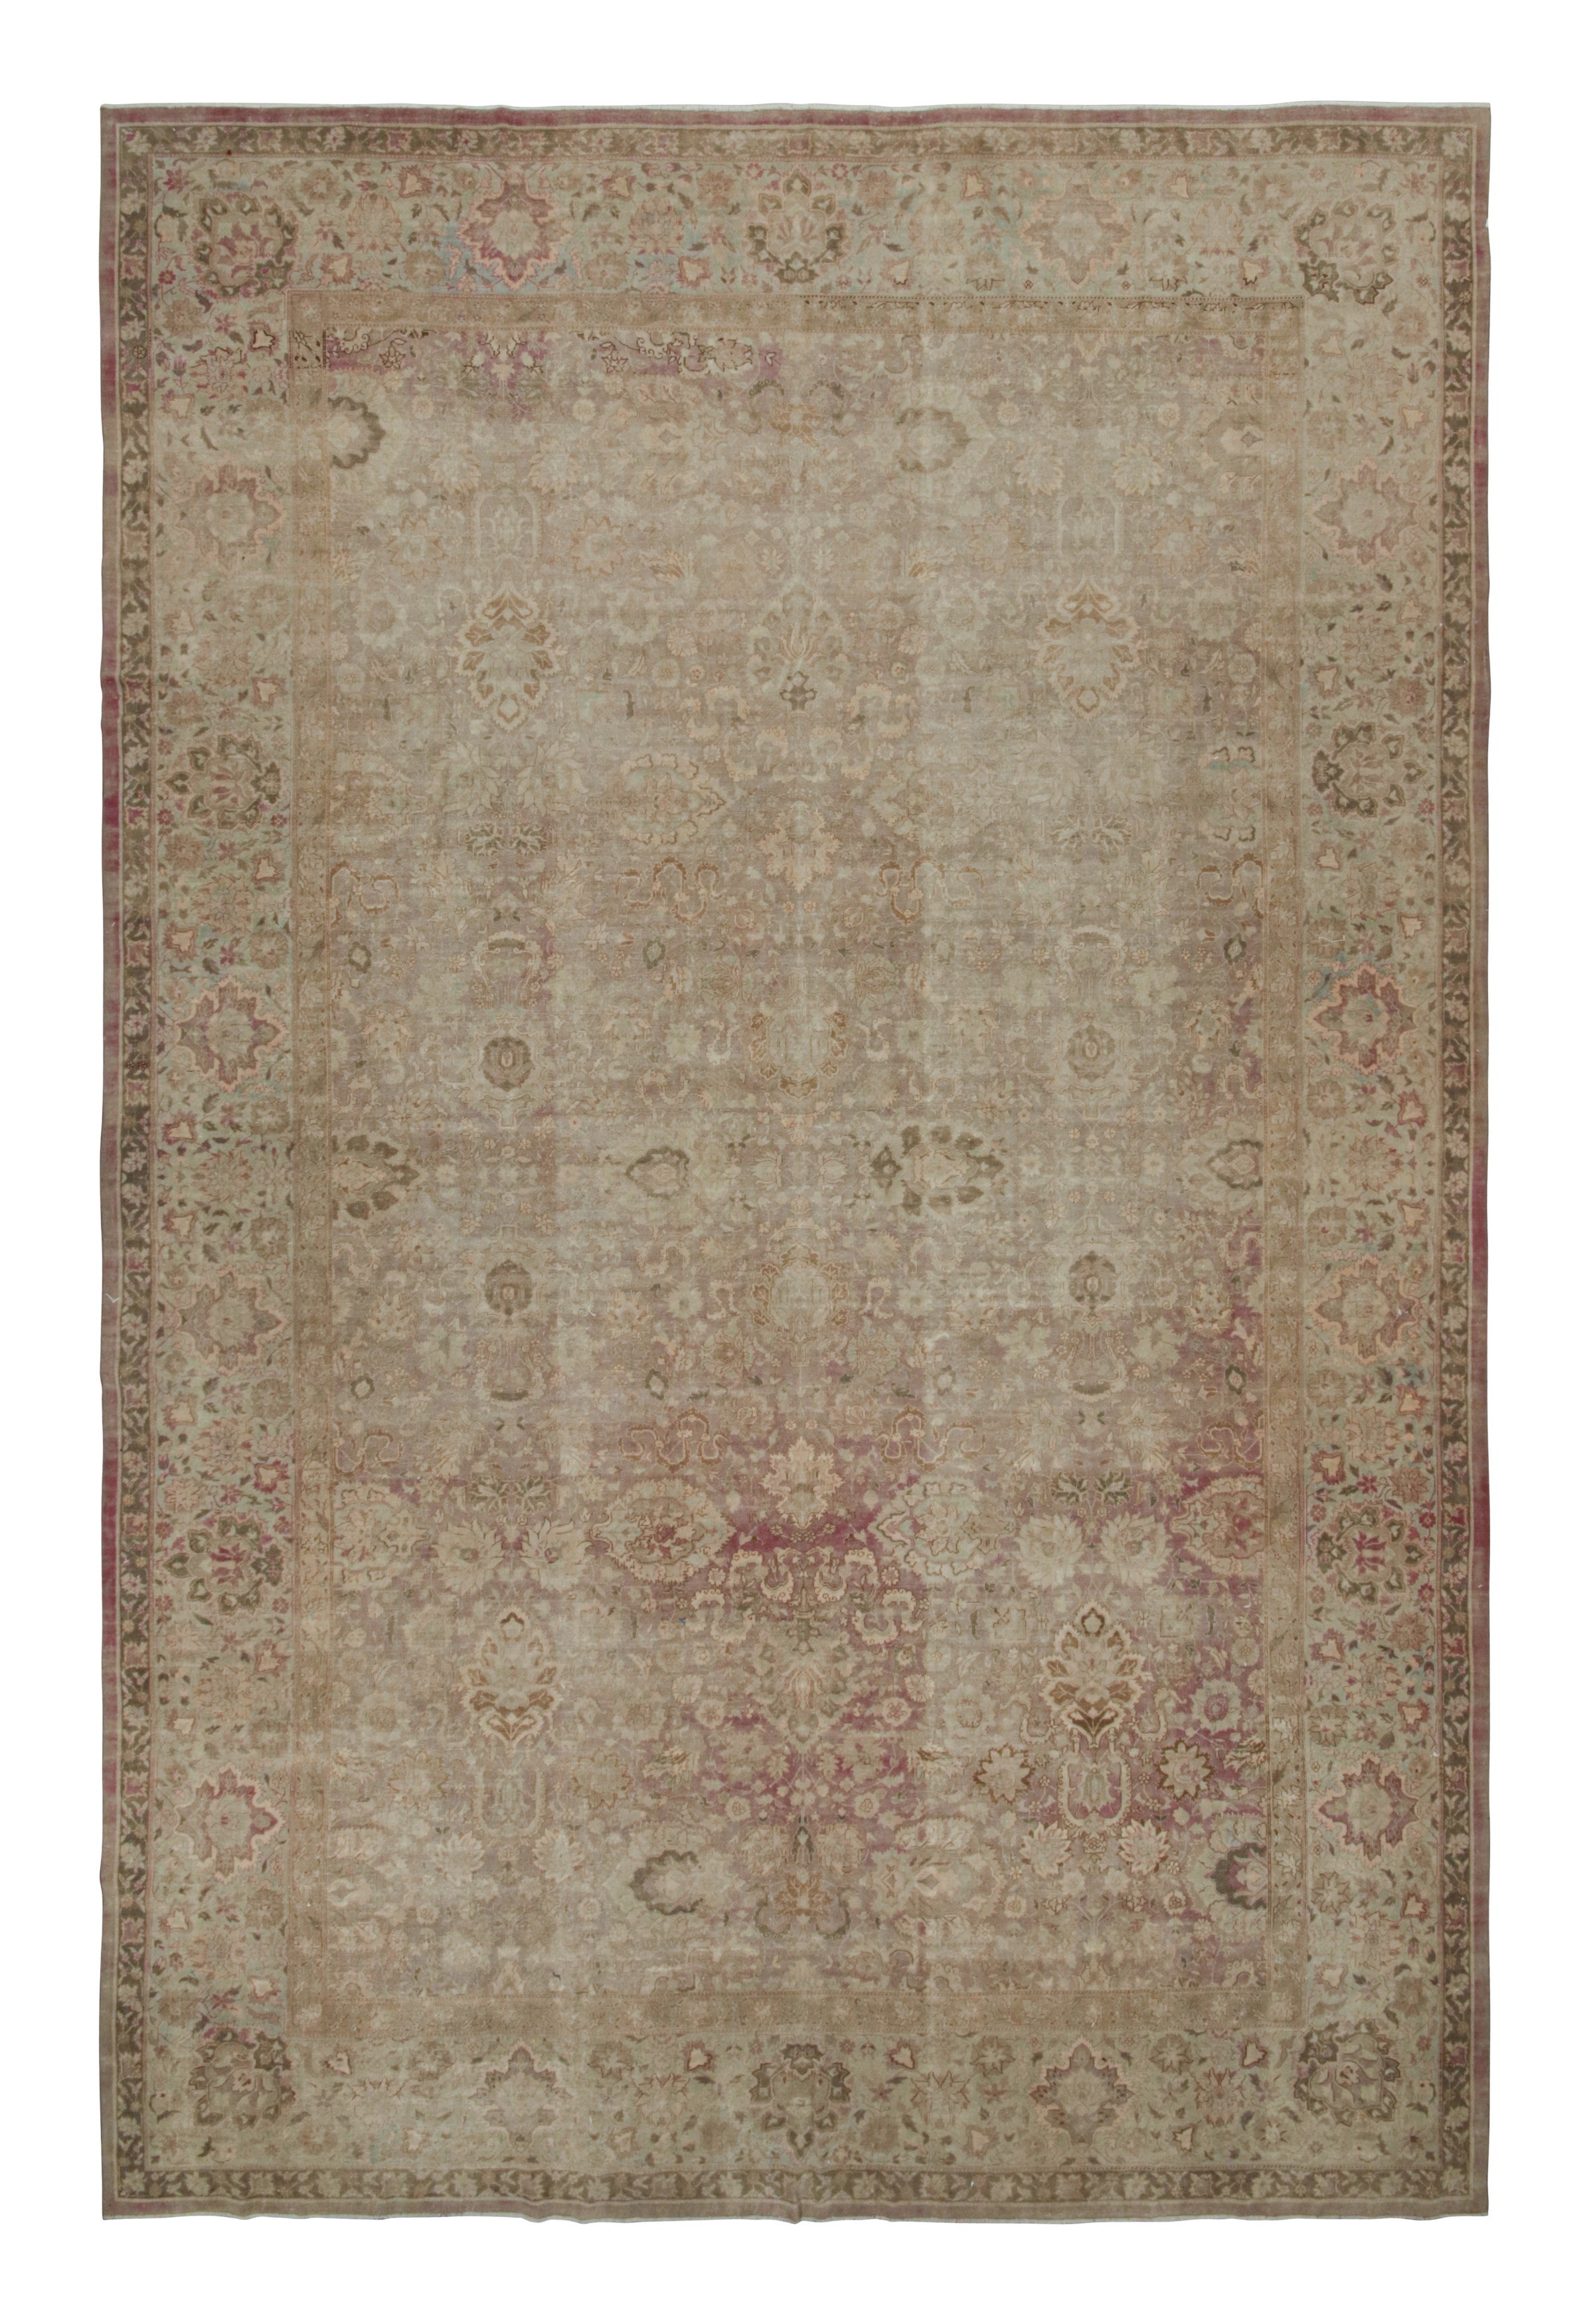 Antiquities Larestan Rug in Beige/Brown, with Floral Patterns, from Rug & Kilim